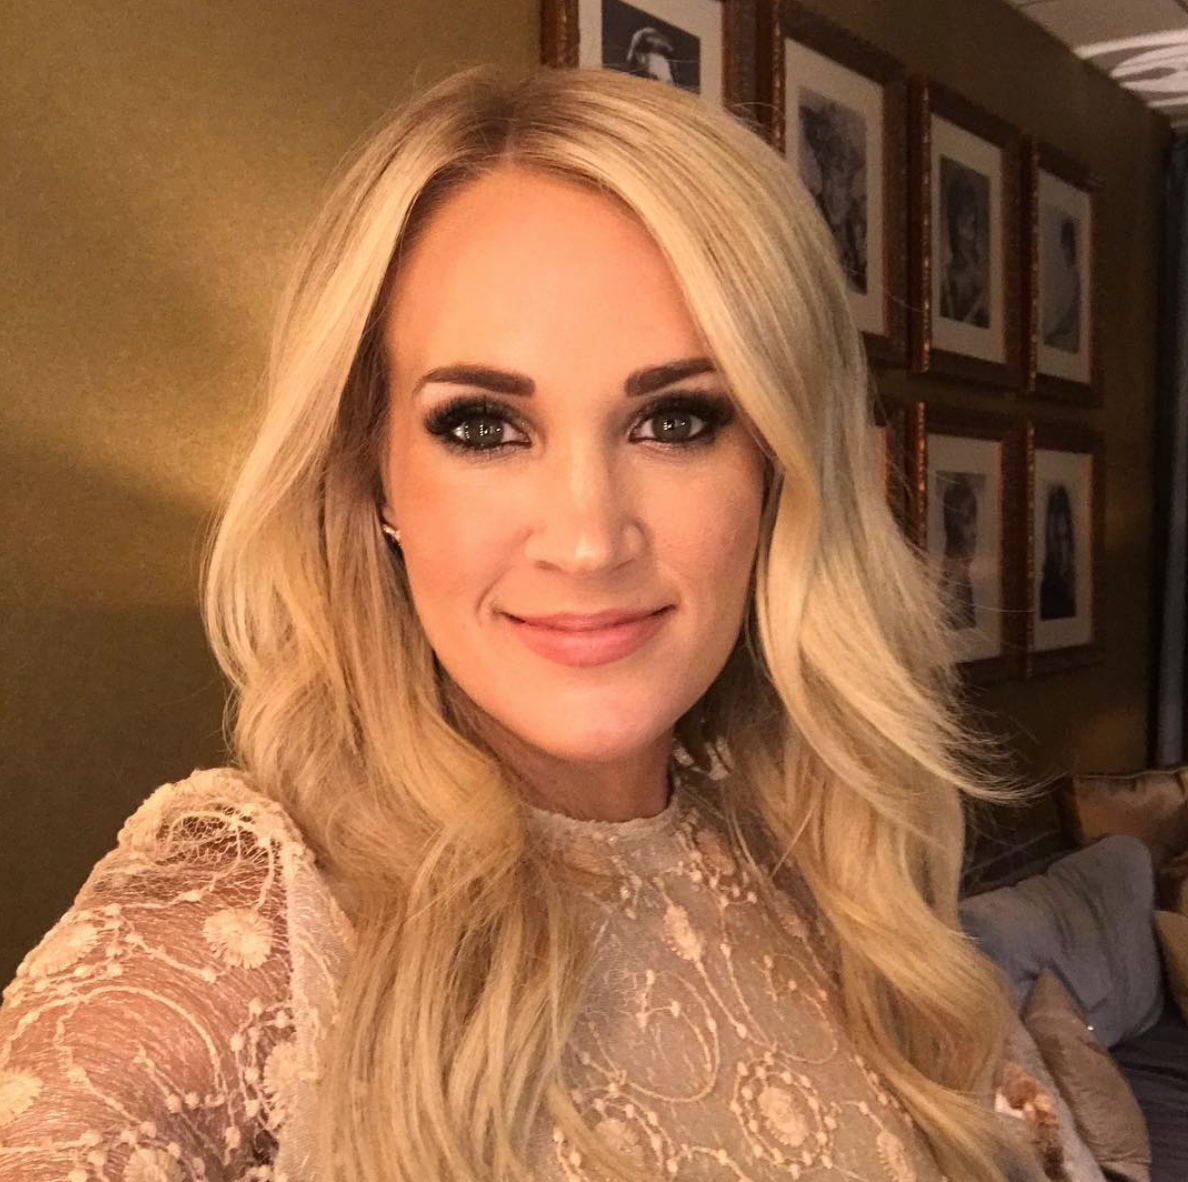 First Photos Emerge After Carrie Underwood's Shocking Freak Accident